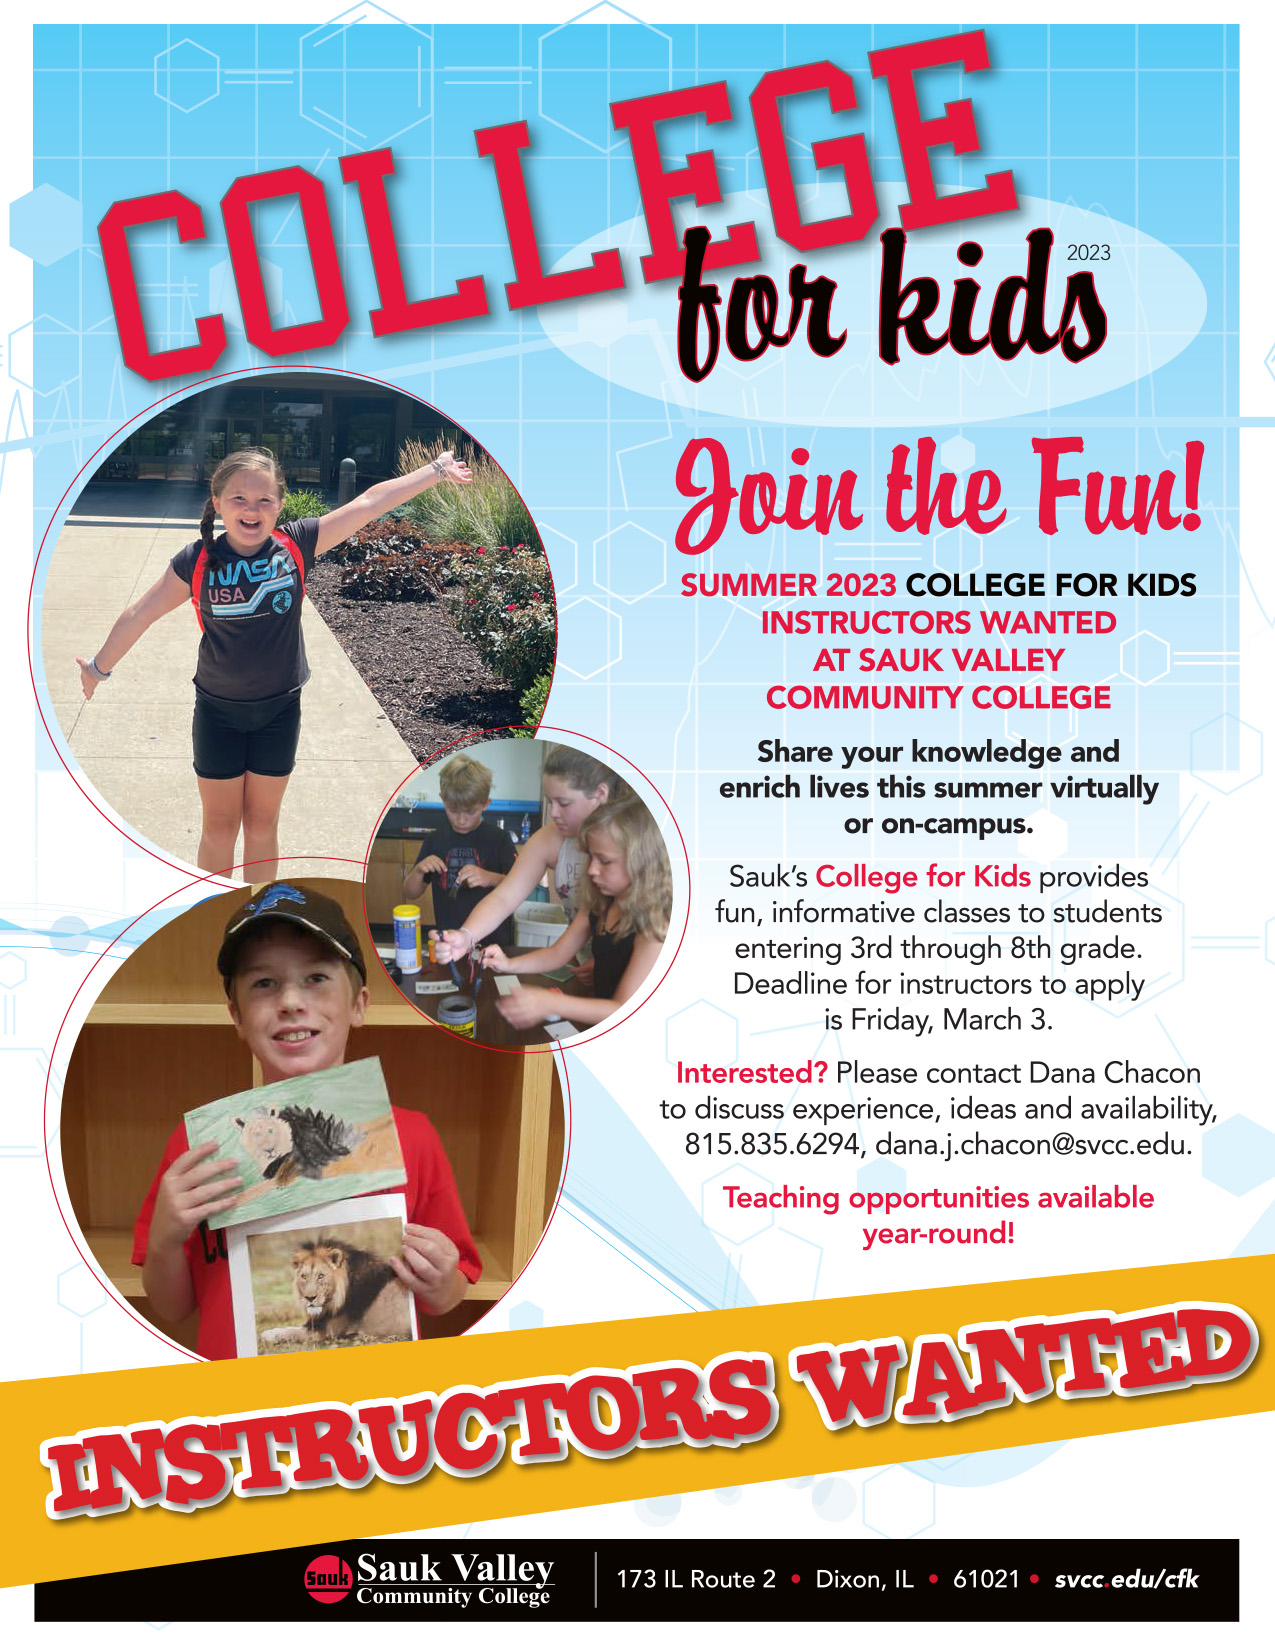 College For Kids 2023 Instructors Needed